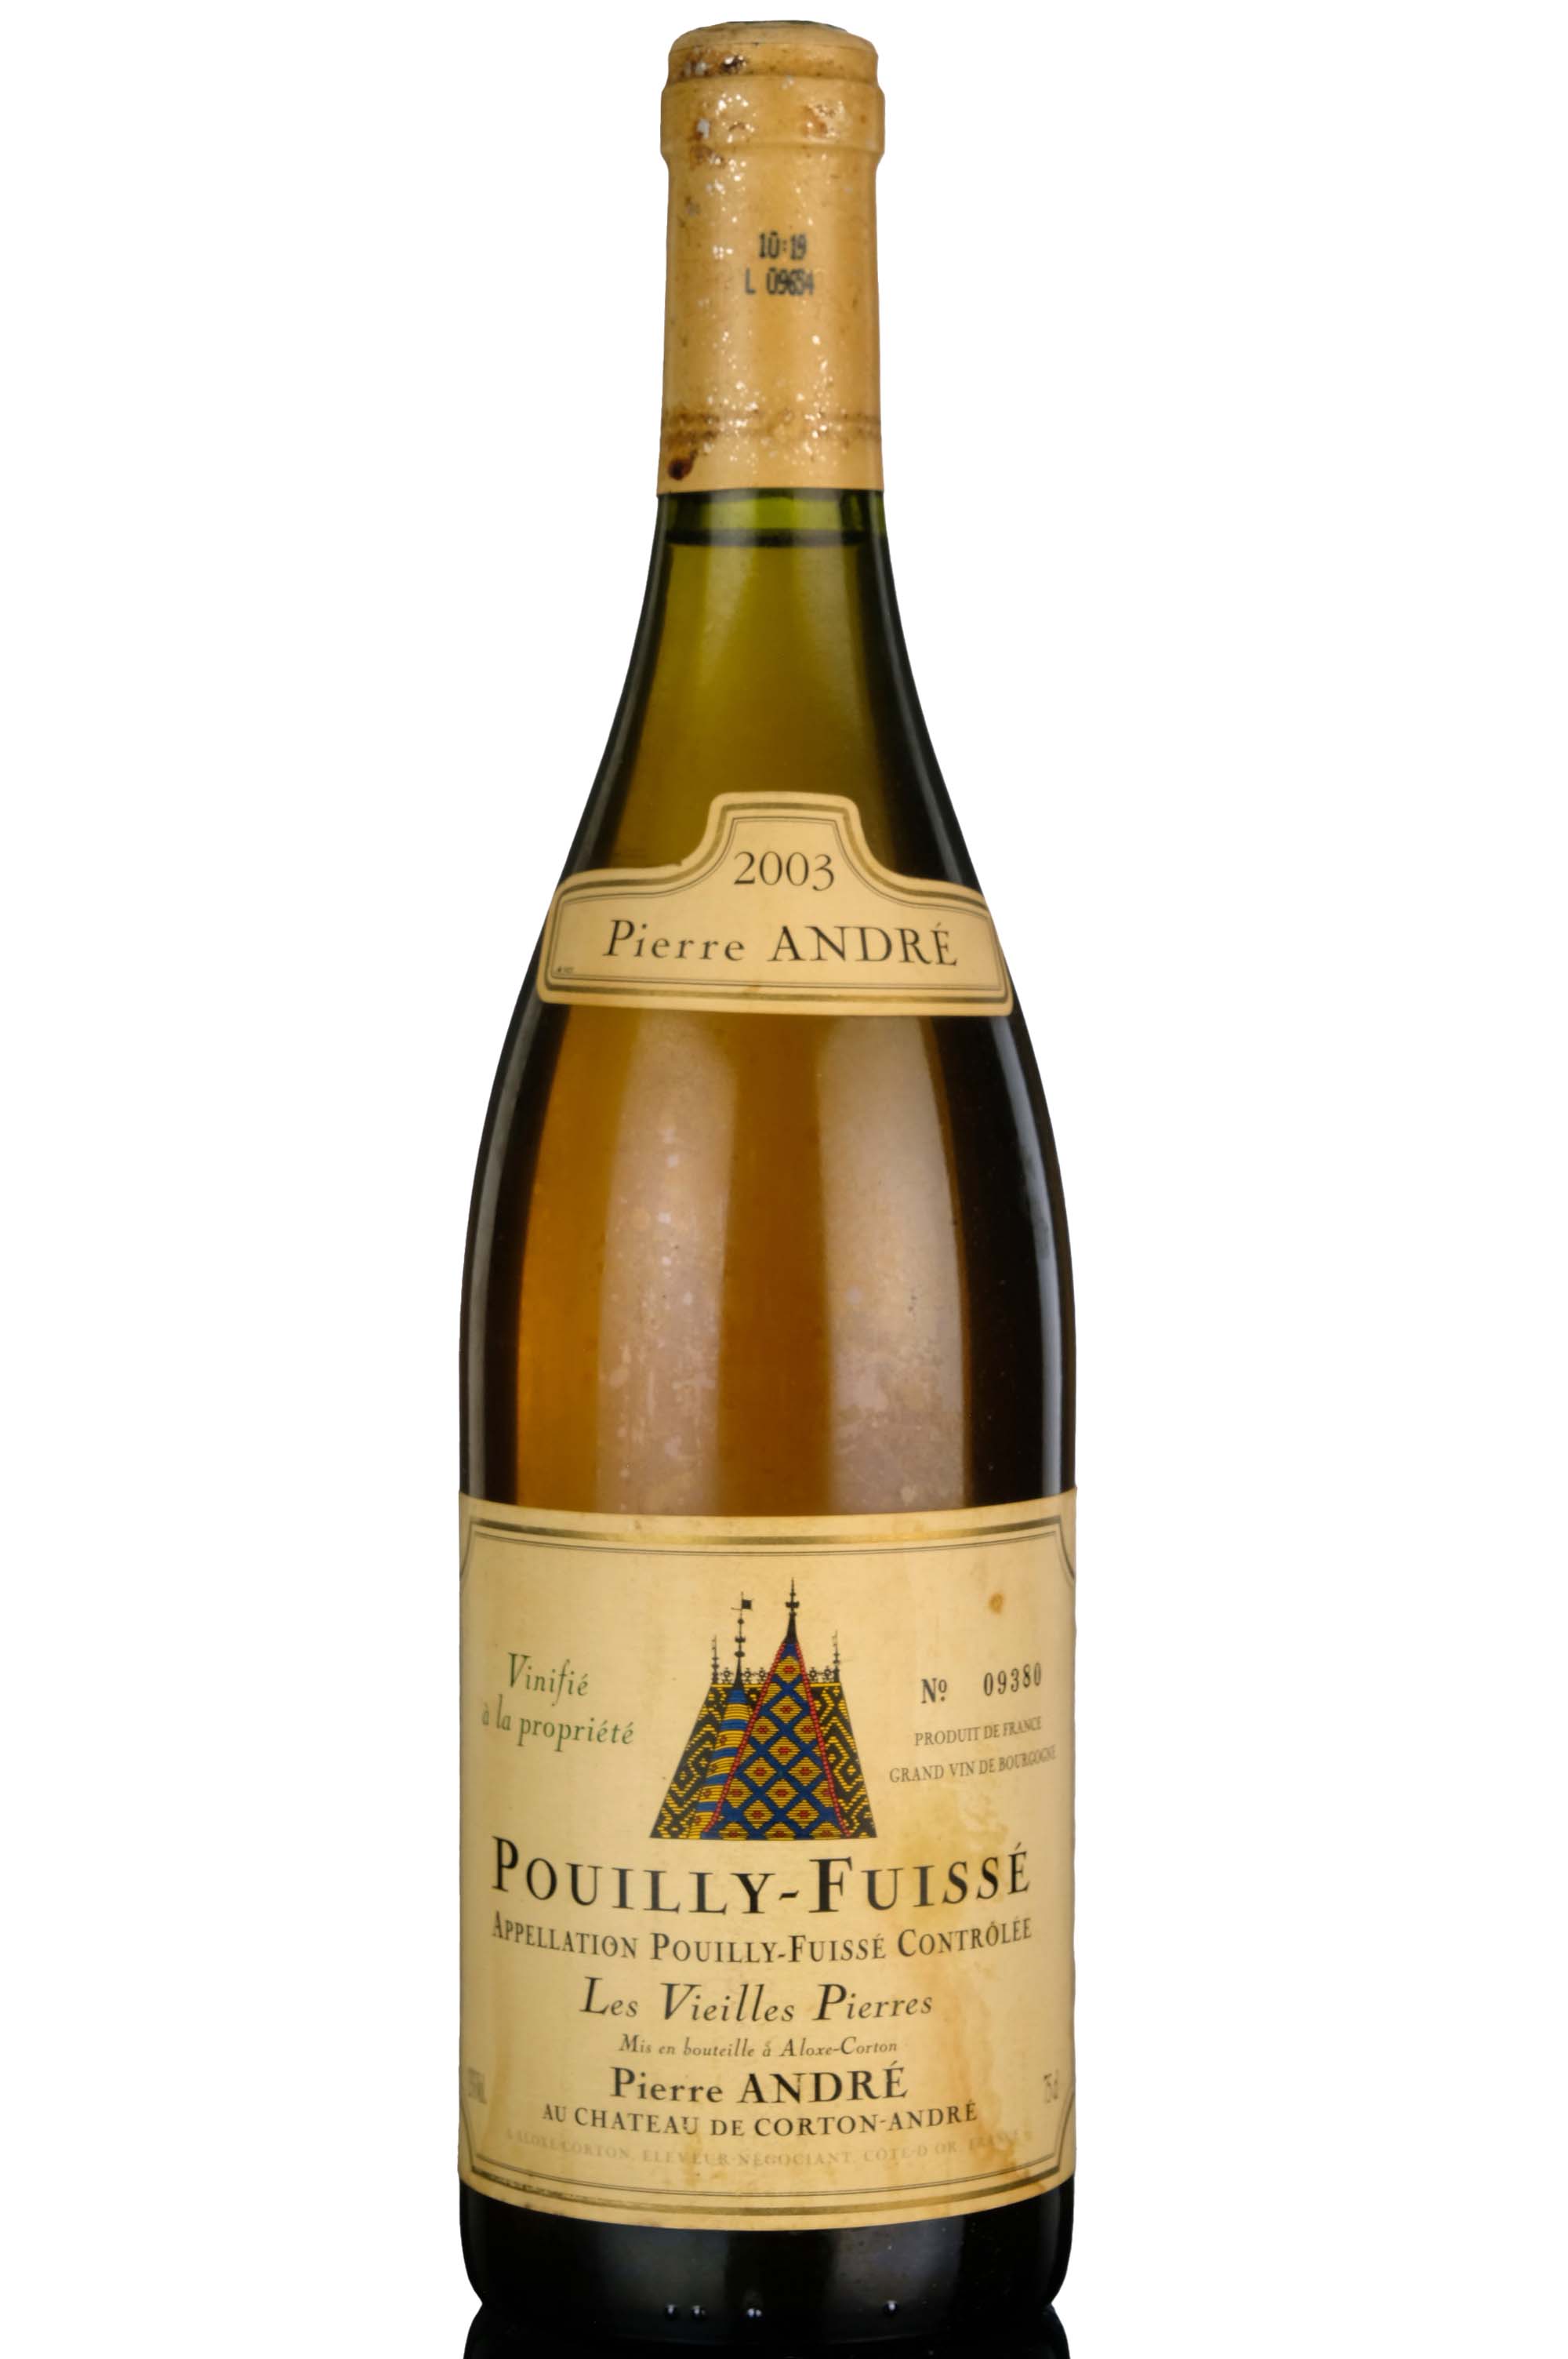 Pierre Andre 2003 Pouilly-Fuisse